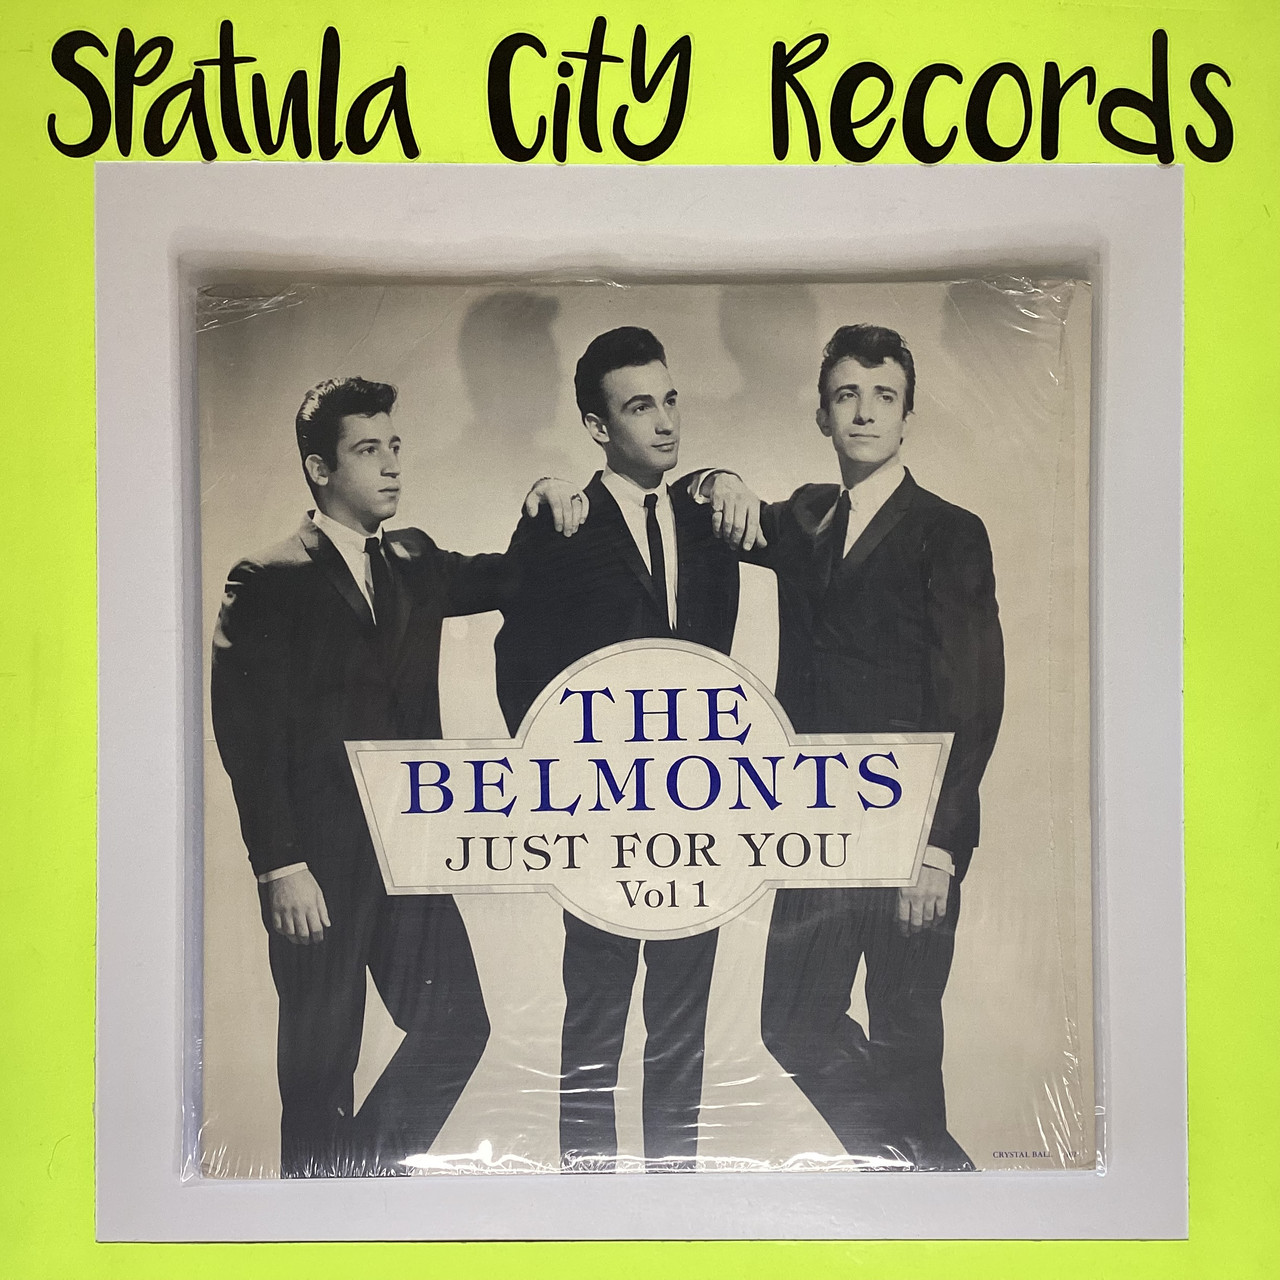 The Belmonts - Just For You Vol 1 - vinyl record LP